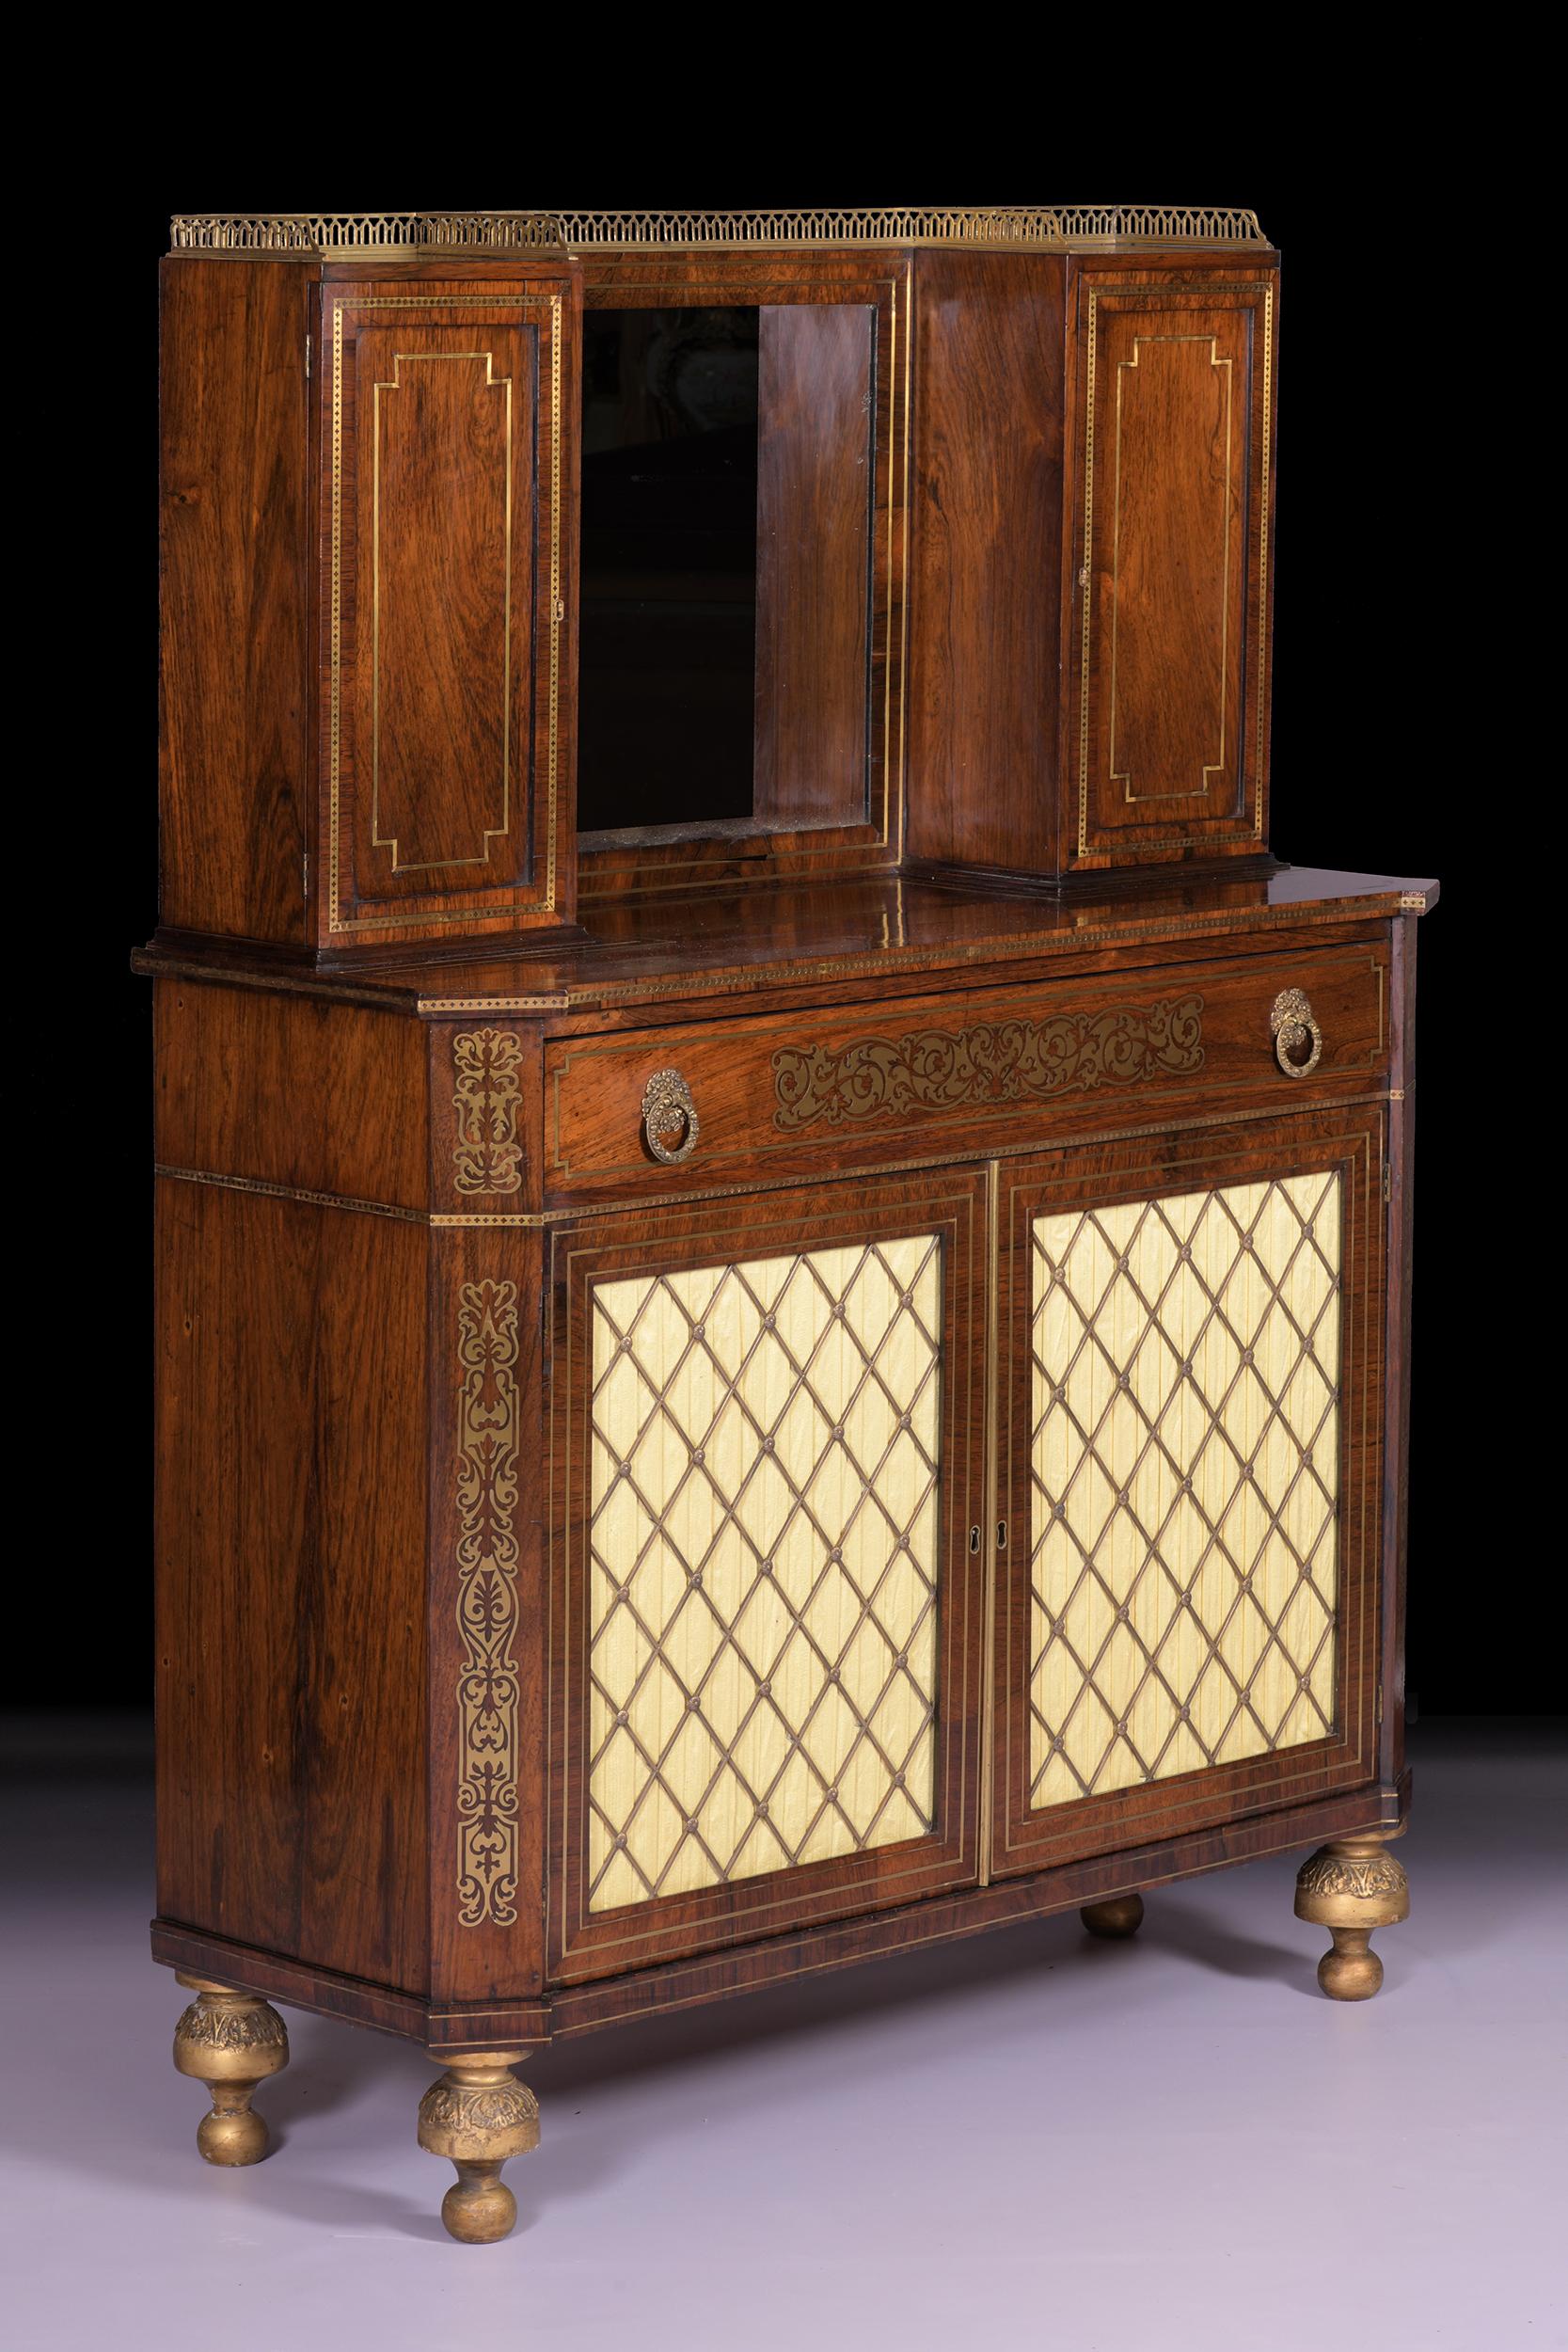 Early 19th Century English Regency Side Cabinet in the Manner of John Mclean In Good Condition For Sale In Dublin, IE